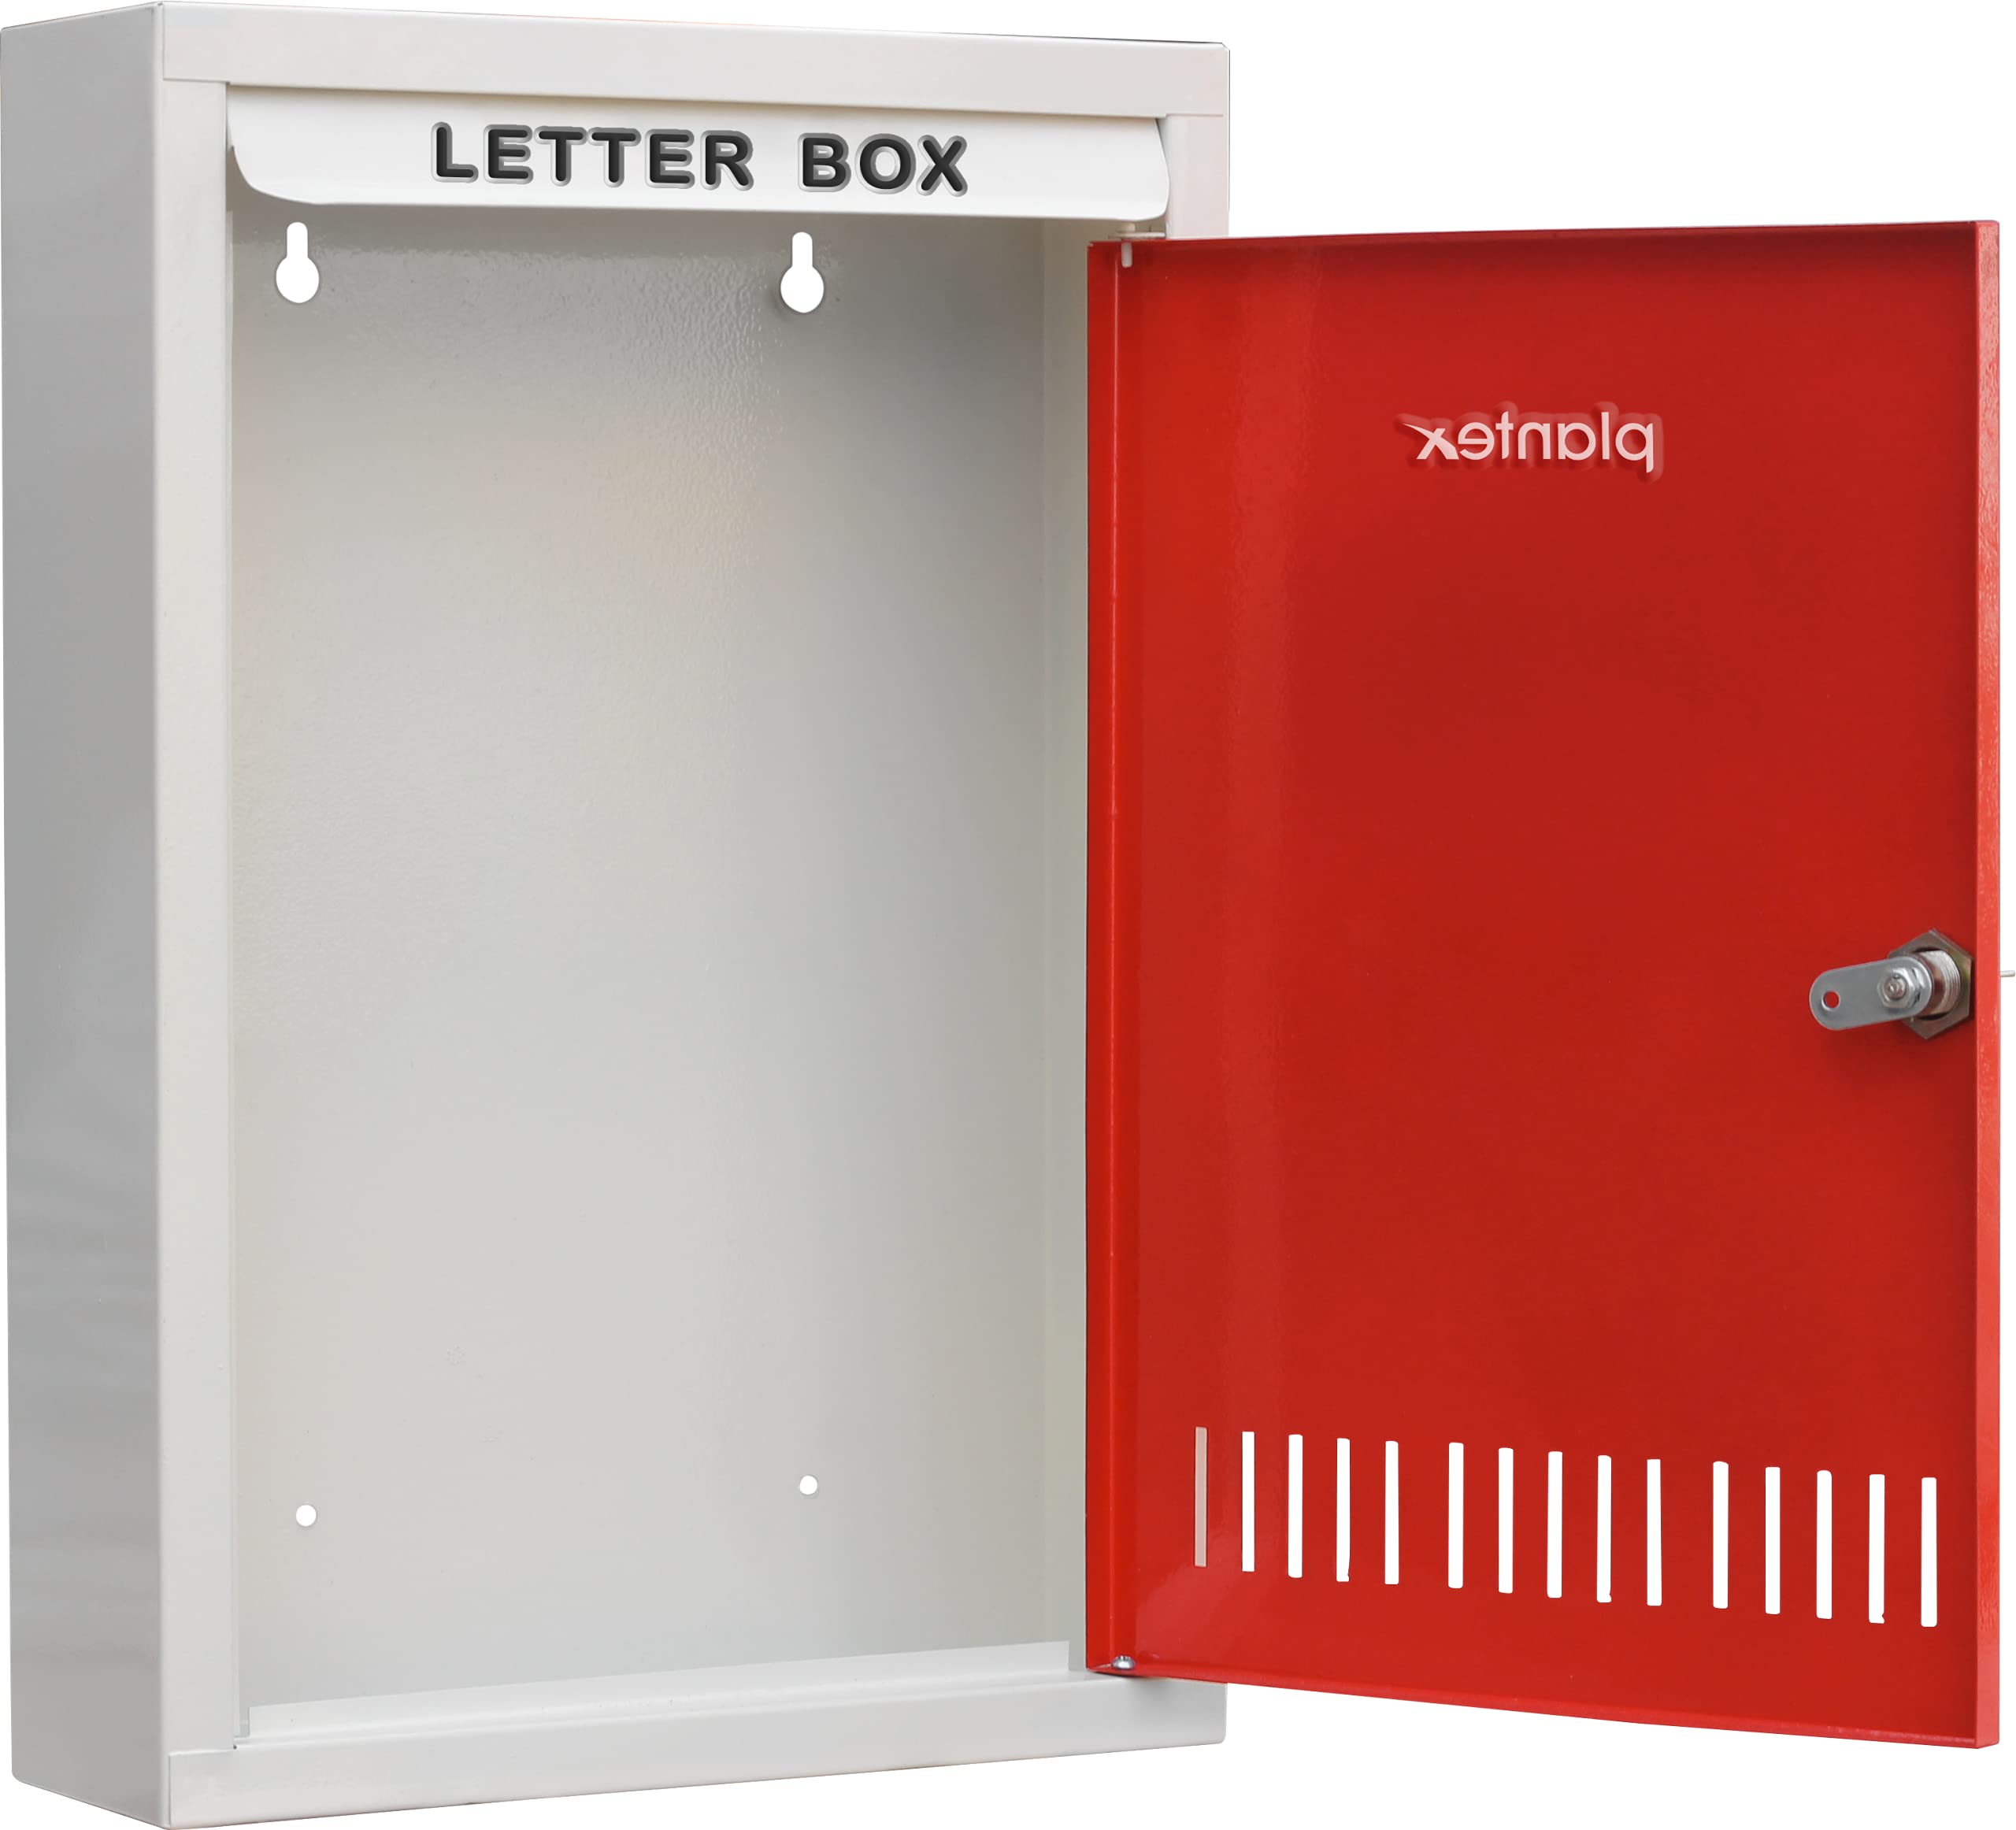 Plantex GI Metal Large Size Letter Box/Mail Box for Home/gate and Wall with Key Lock (Red & Ivory)